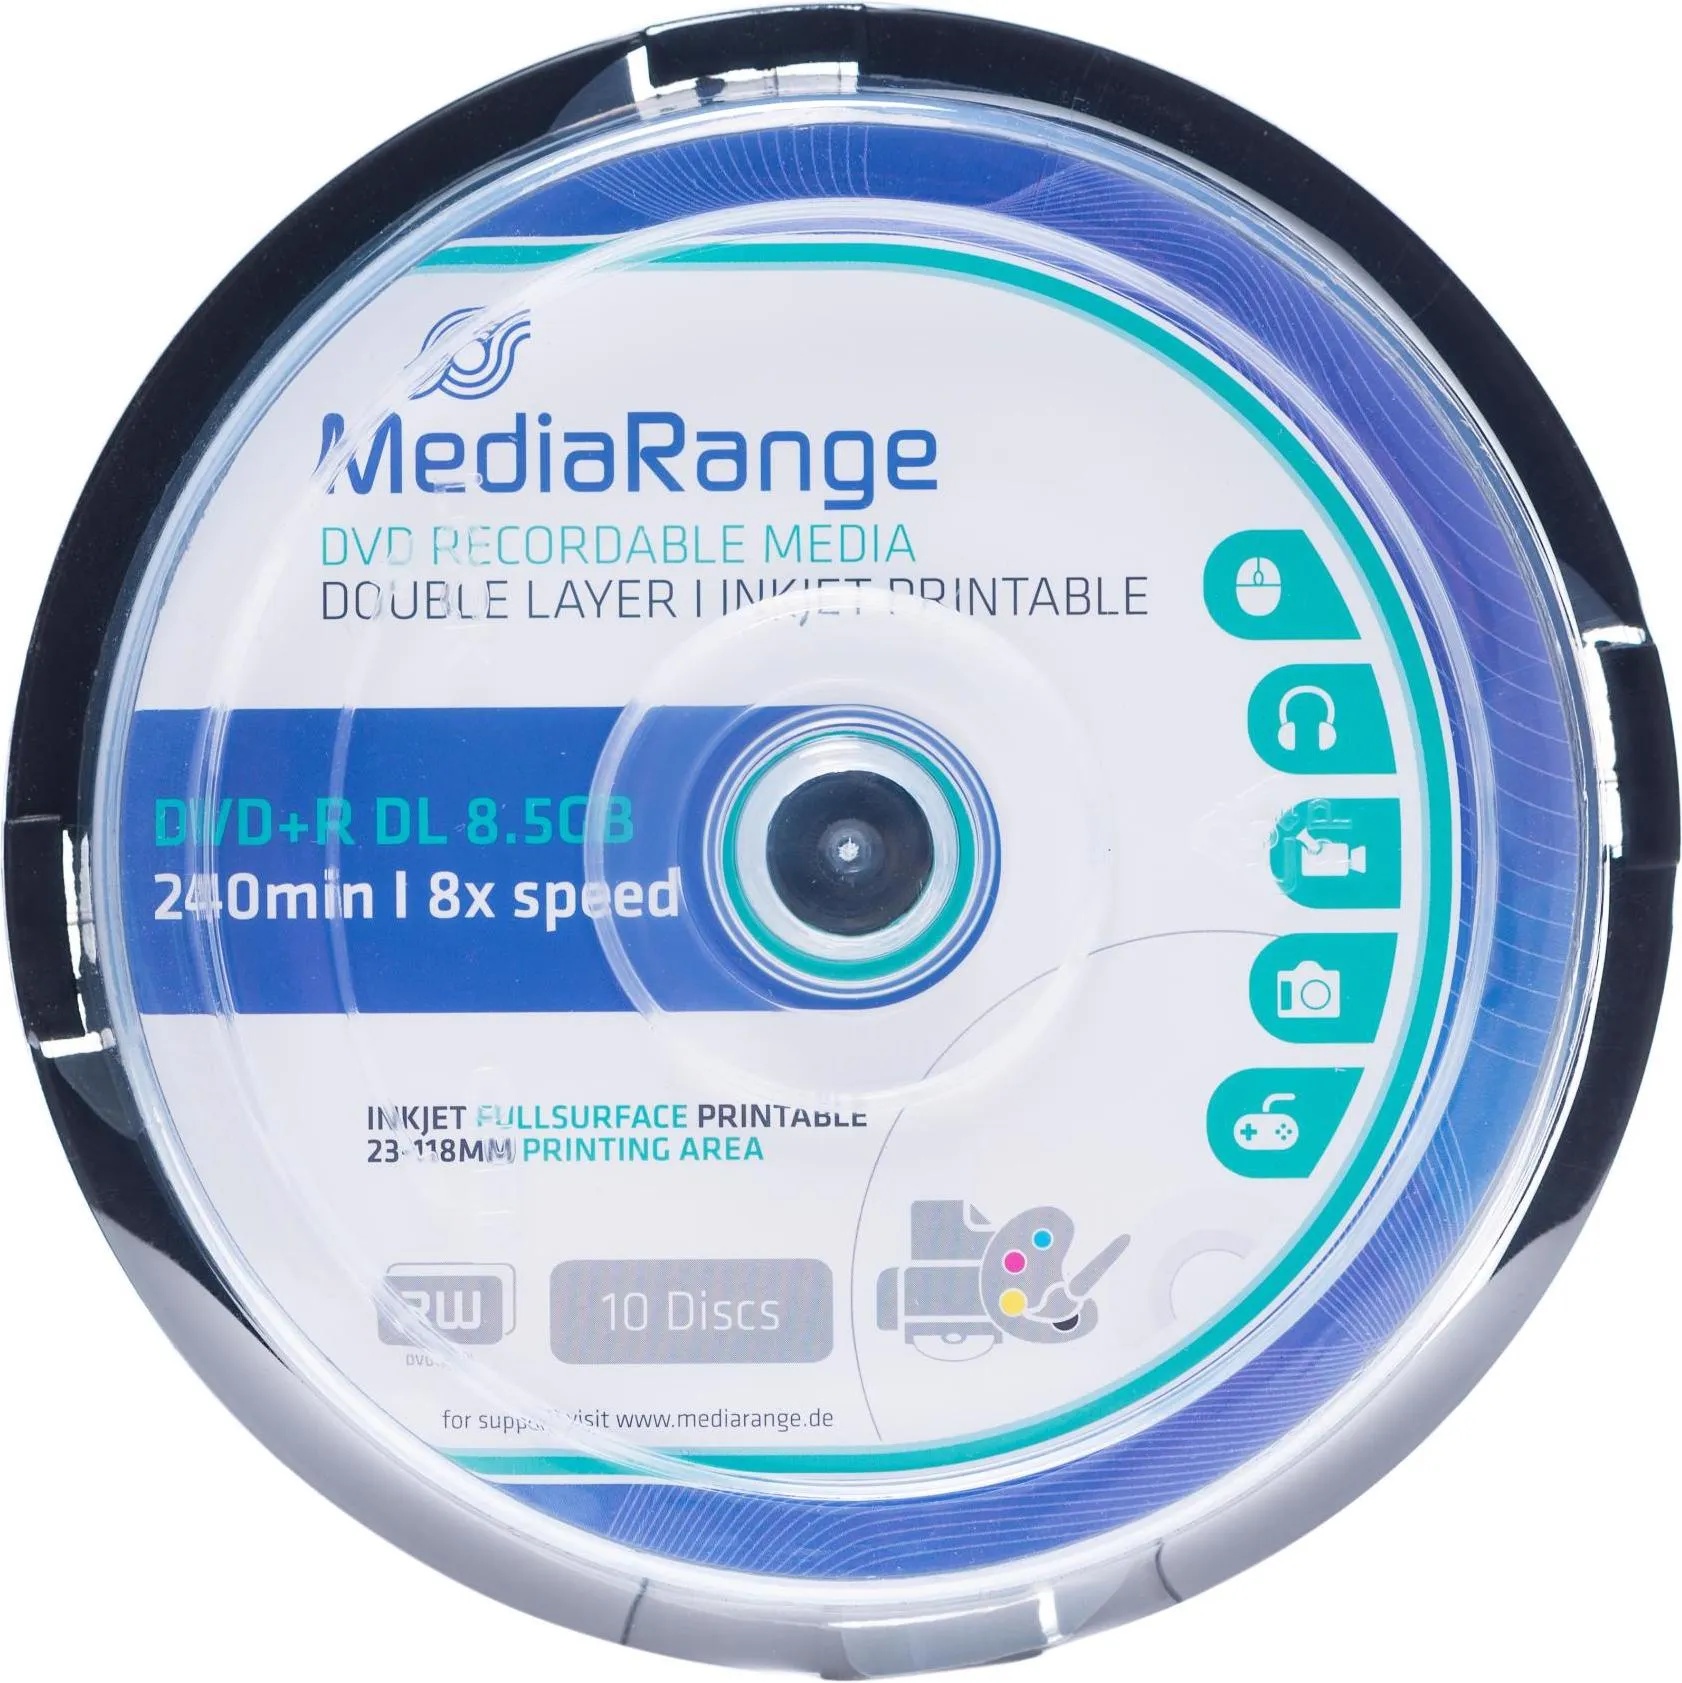 dvd r 8,5 gb double layer spindel